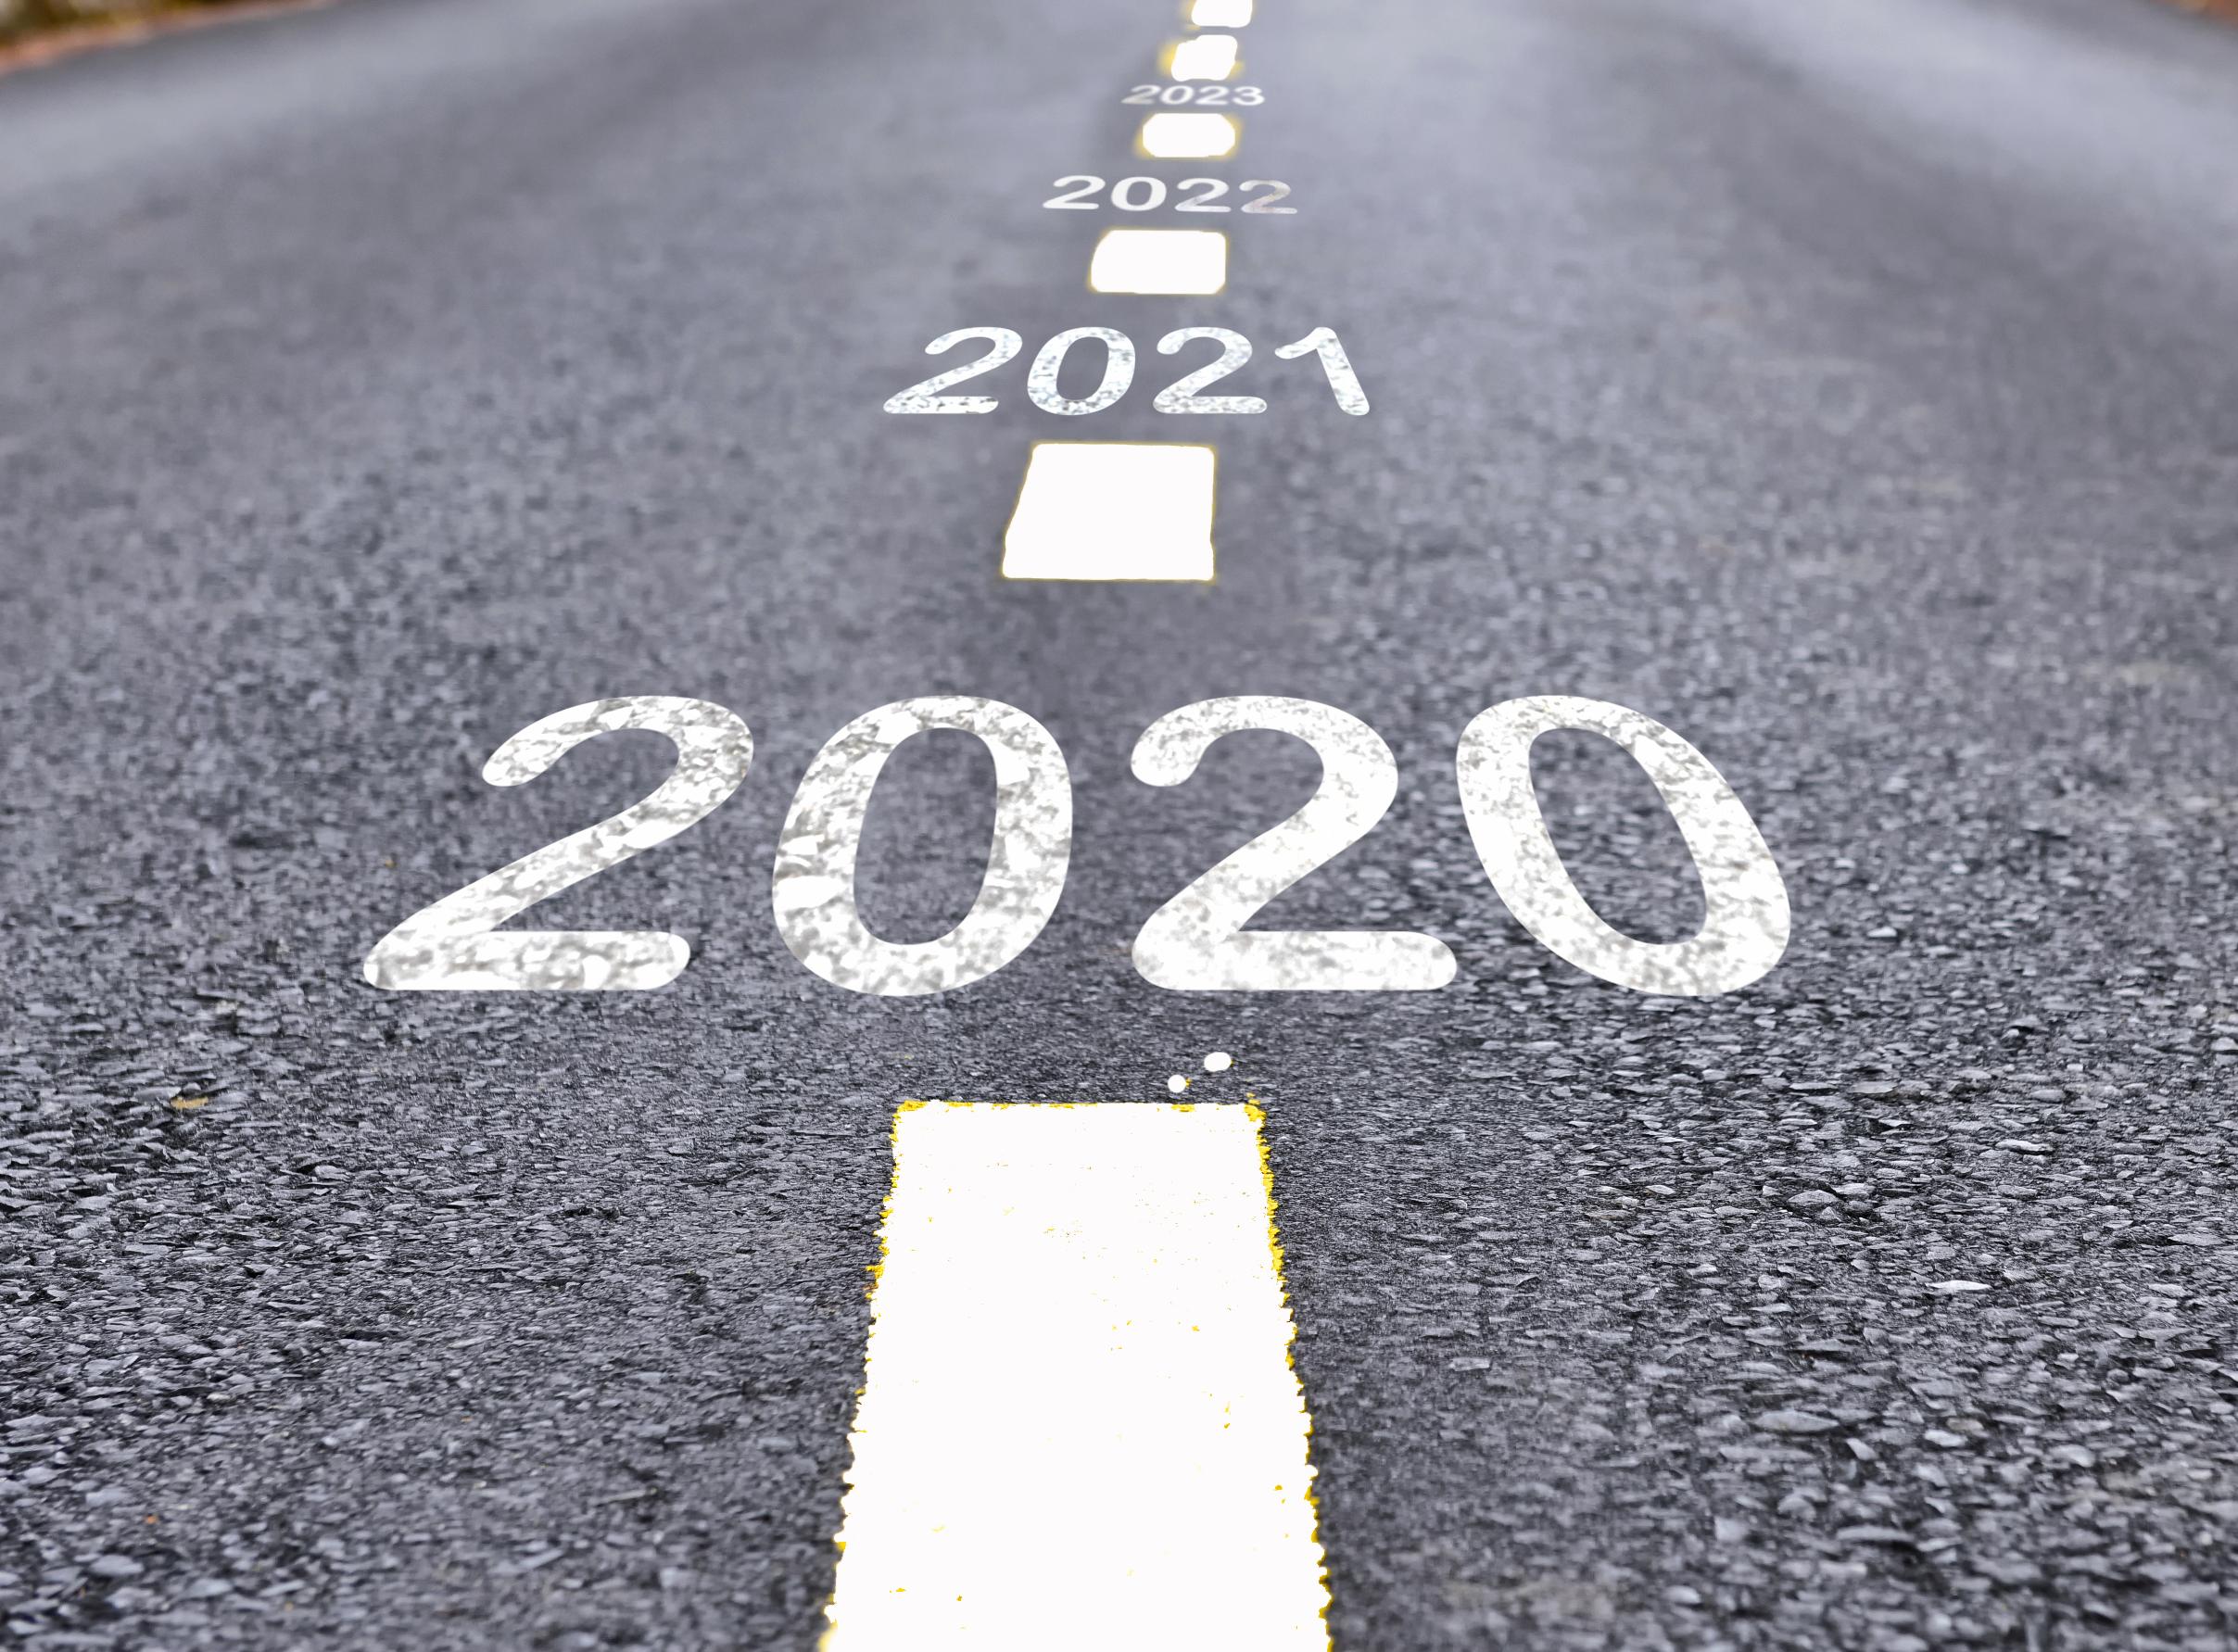 Road with 2020 and 2021 painted white on it into distance